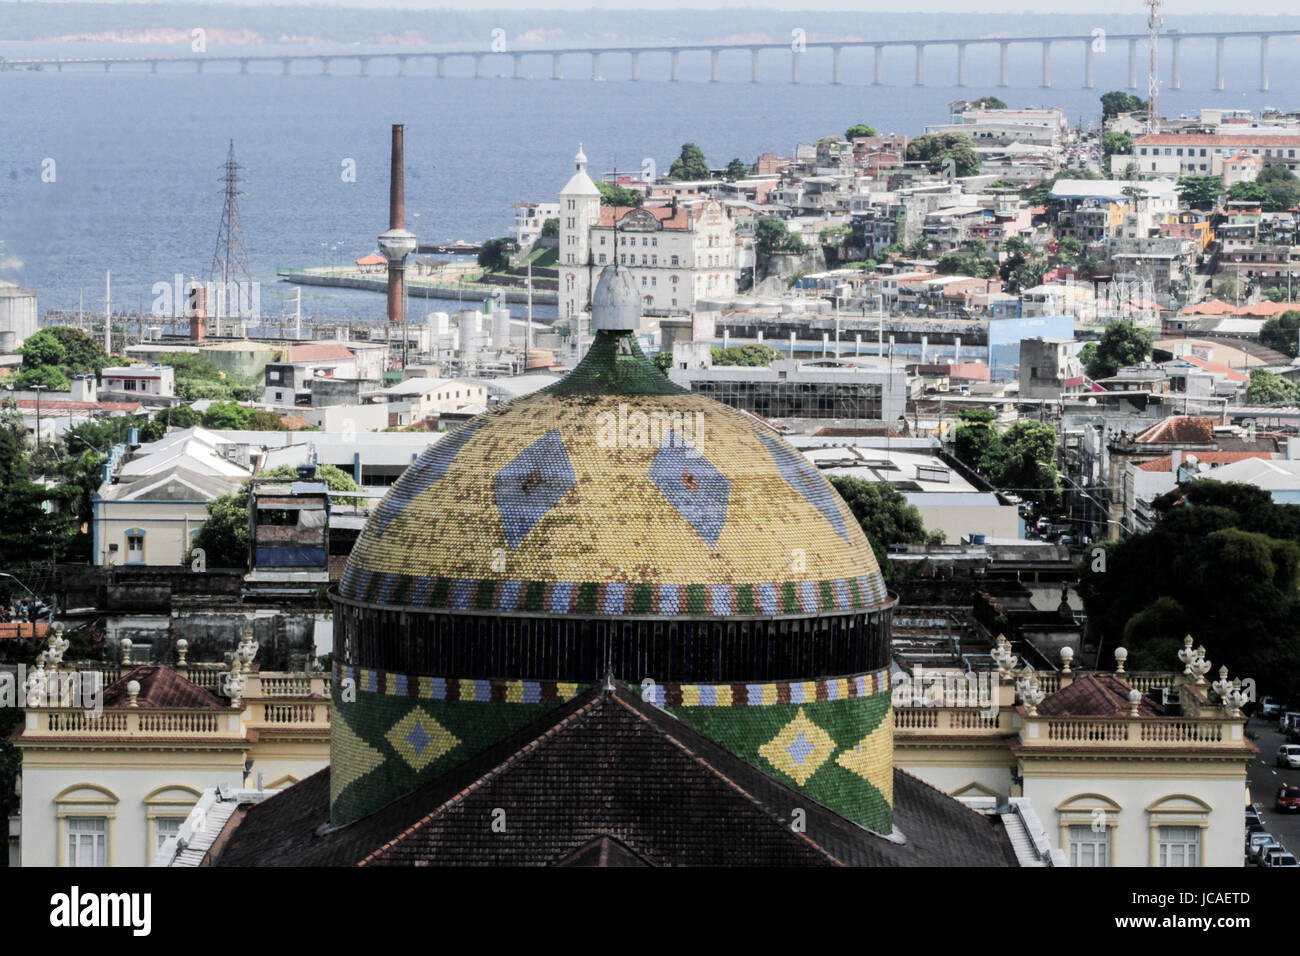 MANAUS, 10.06.2017: View of dome of Amazon Theater and part of the Manaus city. (Photo: Néstor J. Beremblum / Alamy News) Stock Photo